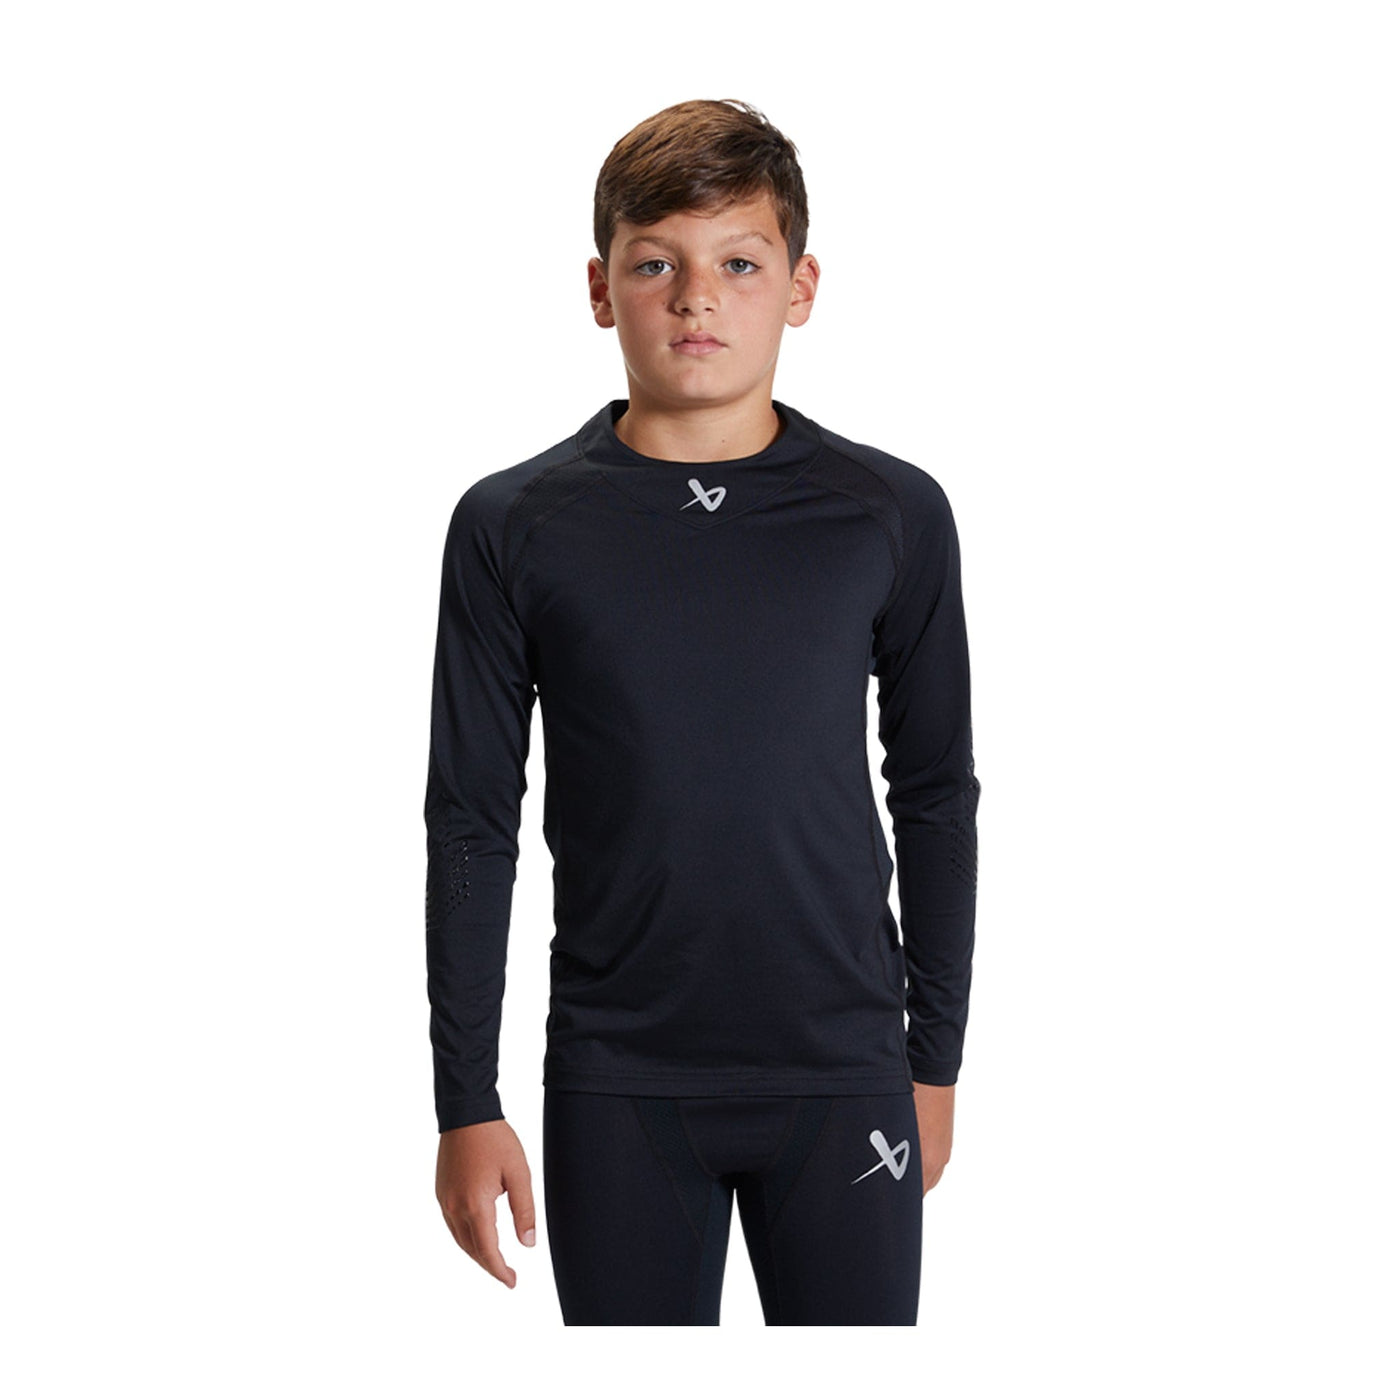 Bauer Pro Junior Baselayer Shirt - The Hockey Shop Source For Sports